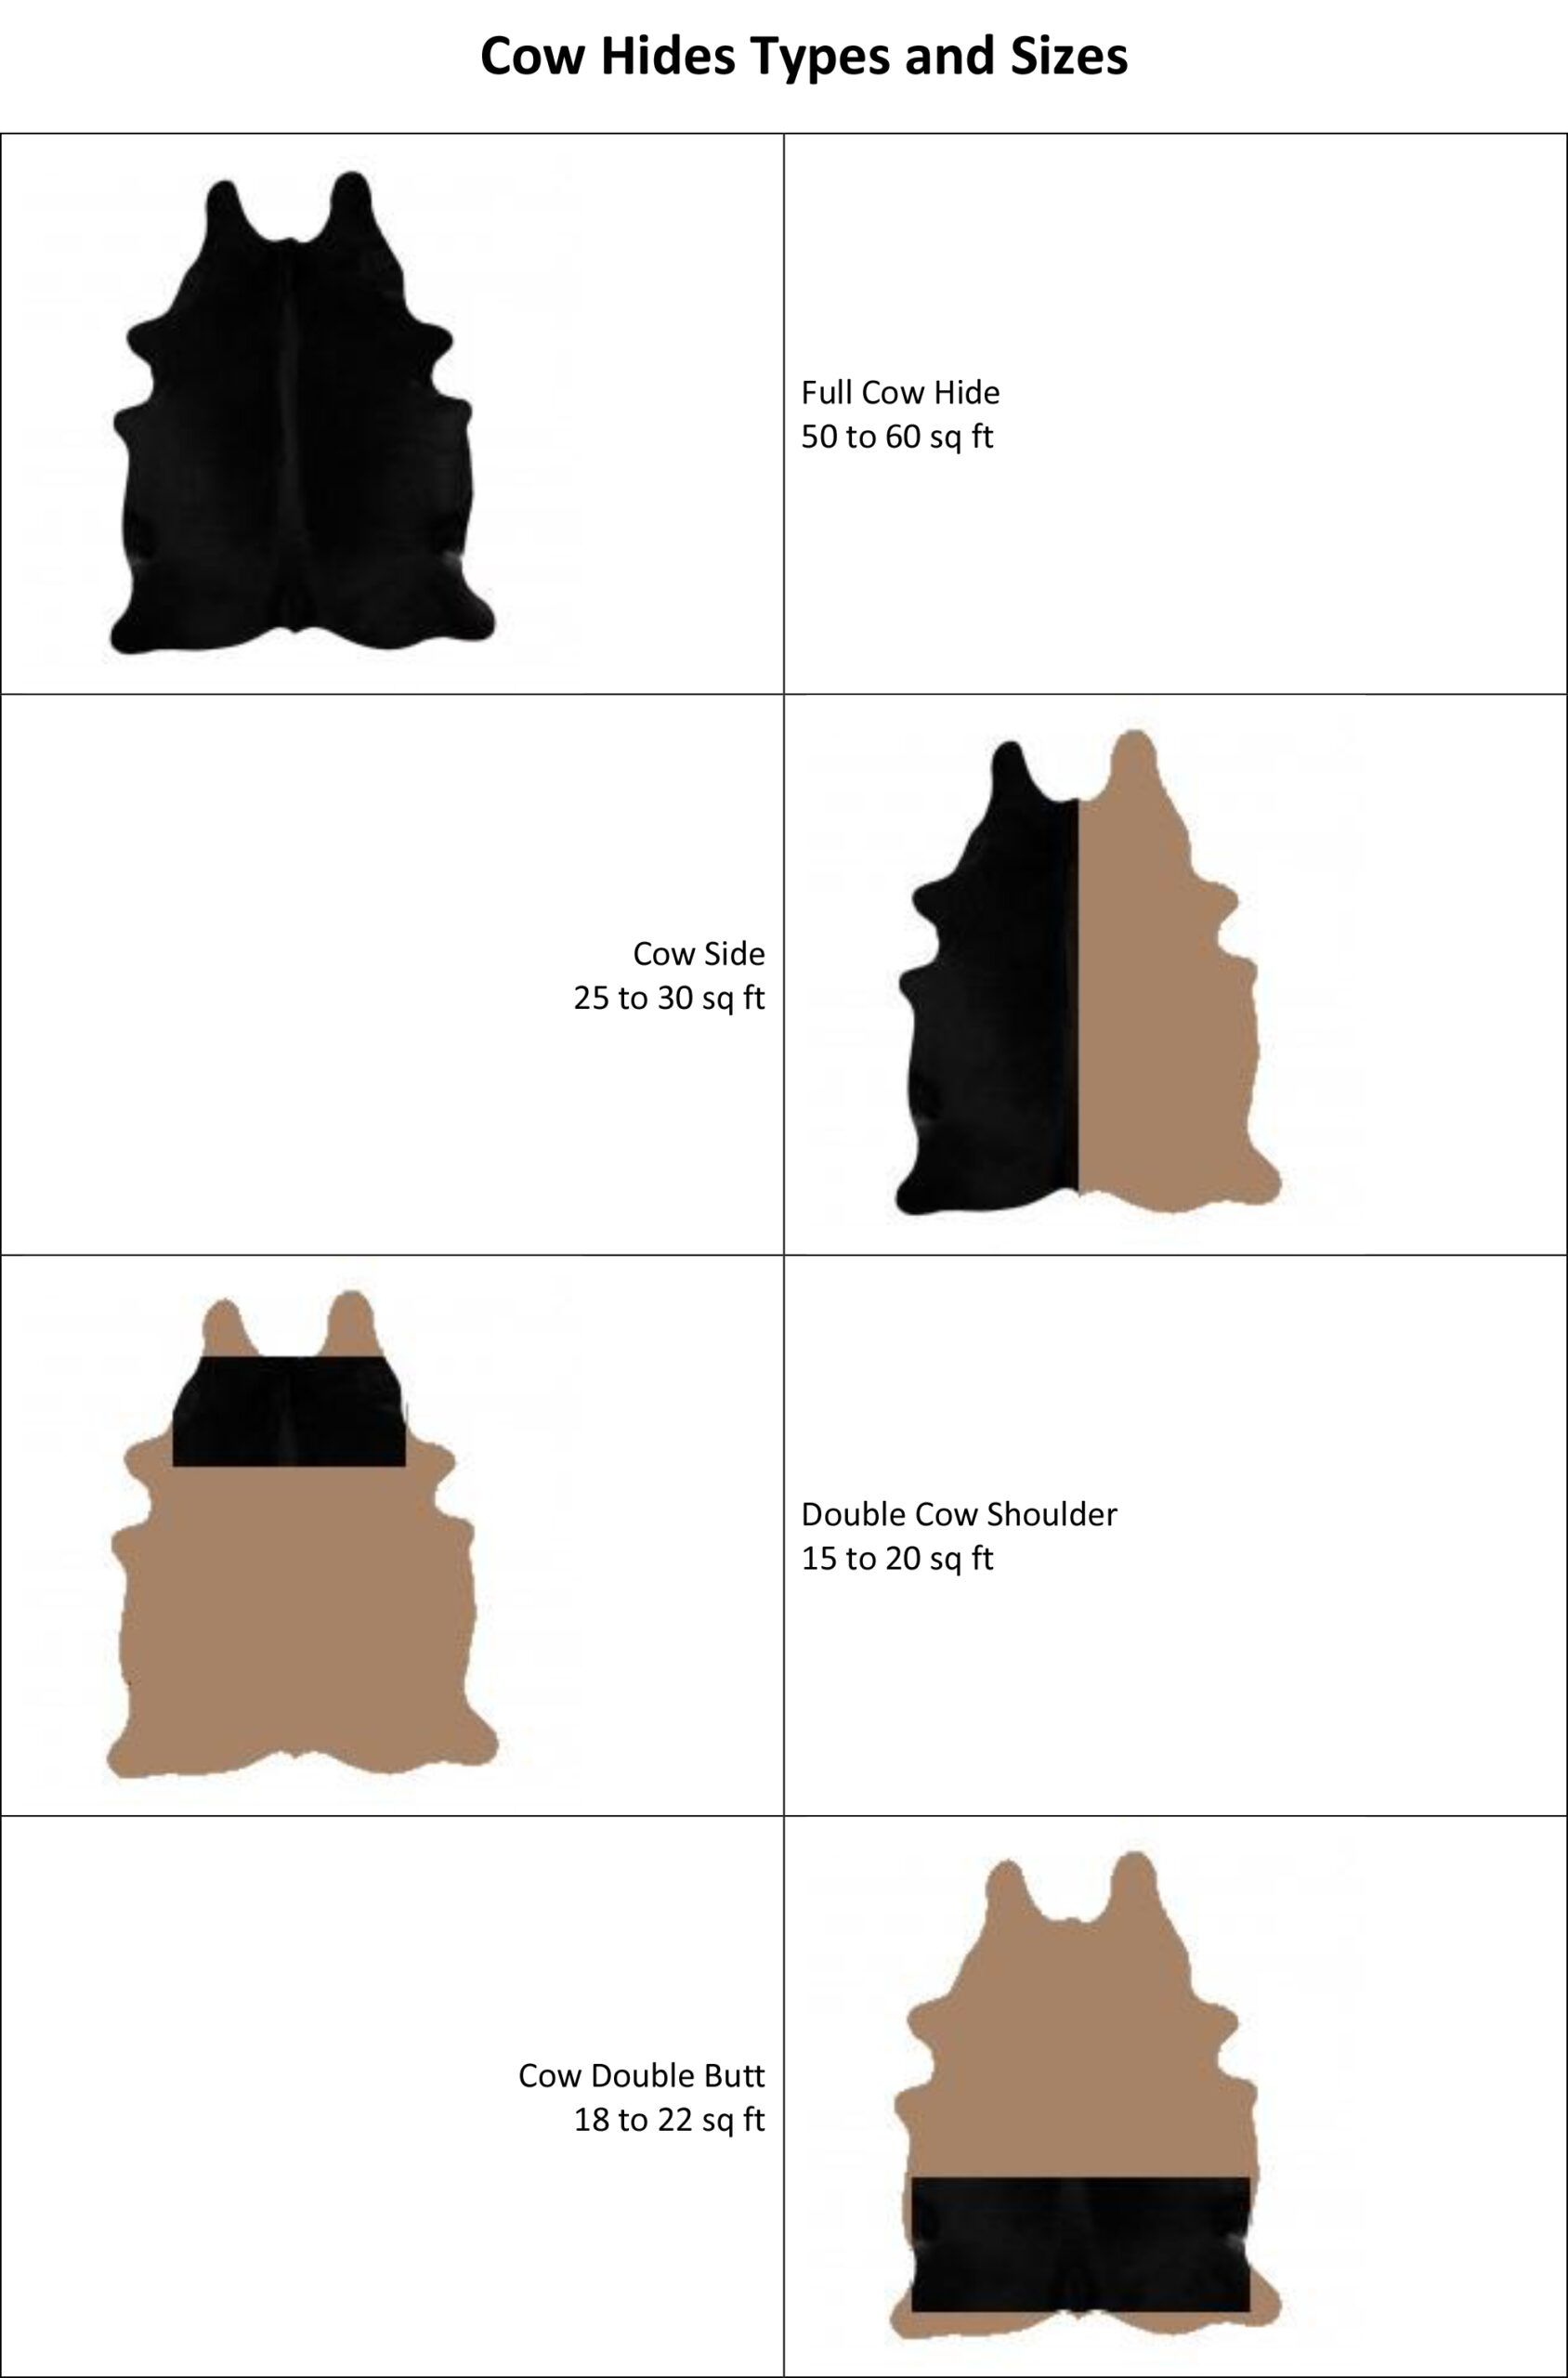 Cow-Hides-Types-and-Sizes